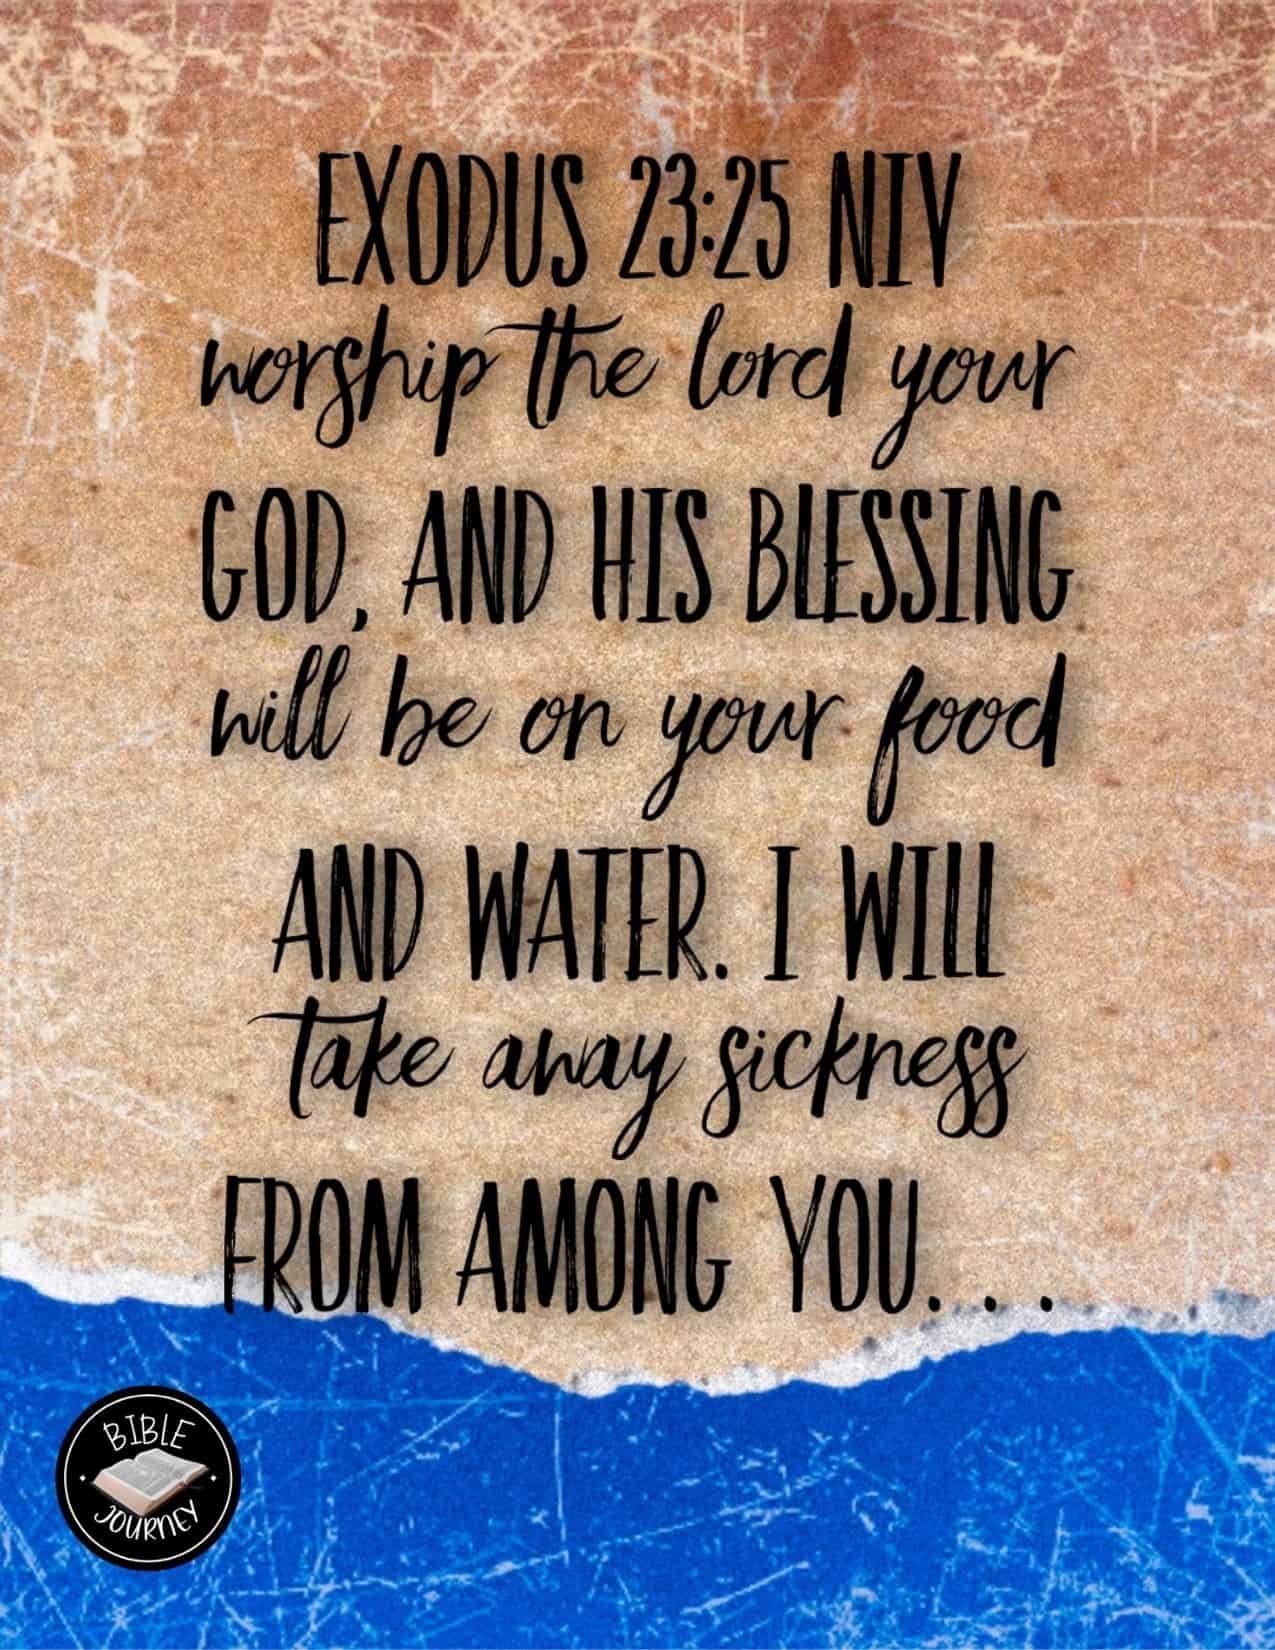 Bible Verse Image About Blessings. Exodus 23:25 NIV